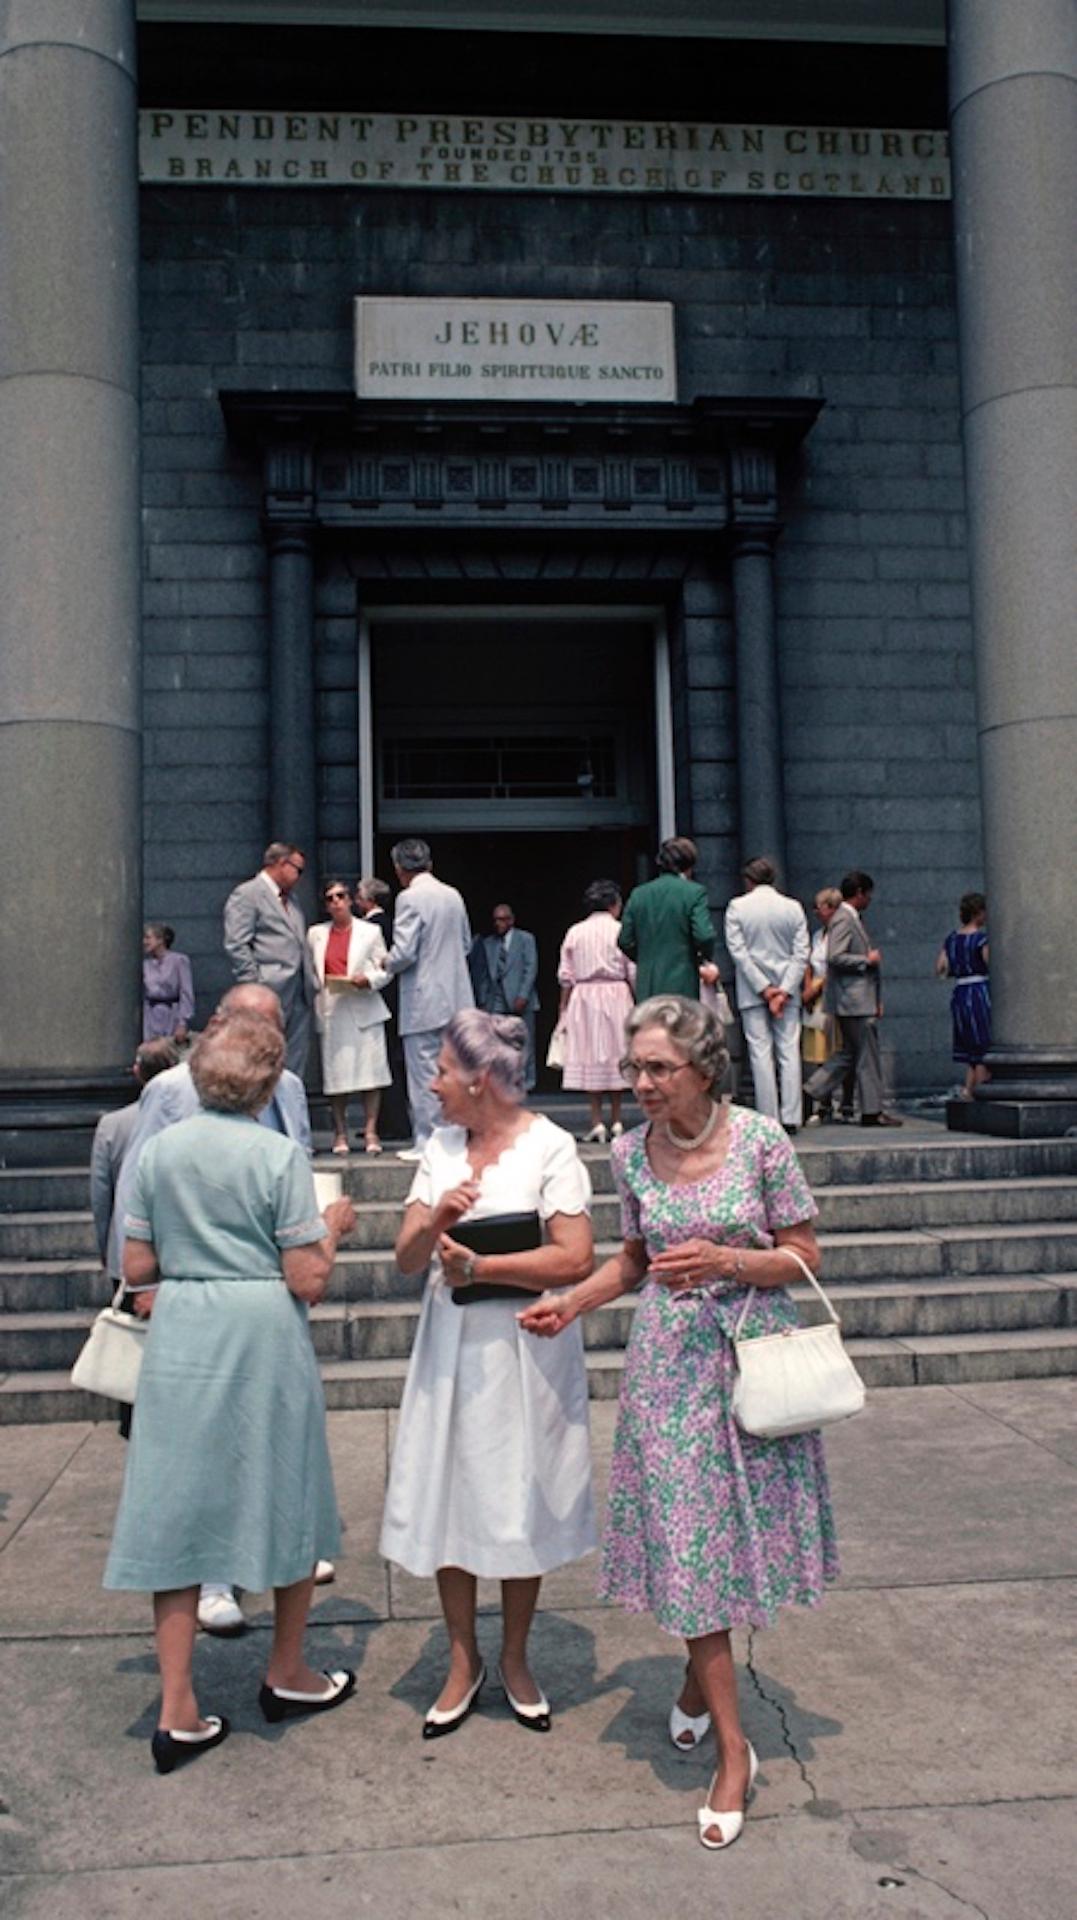 Church Congregation by Alain Le Garsmeur
A congregation outside the Independent Presbyterian Church, Savannah, Georgia, USA, 1983. 

Paper size 20 x 16 inches / 50 x 40 cm
Printed in 2022 - produced from the original transparency
Archival Pigment